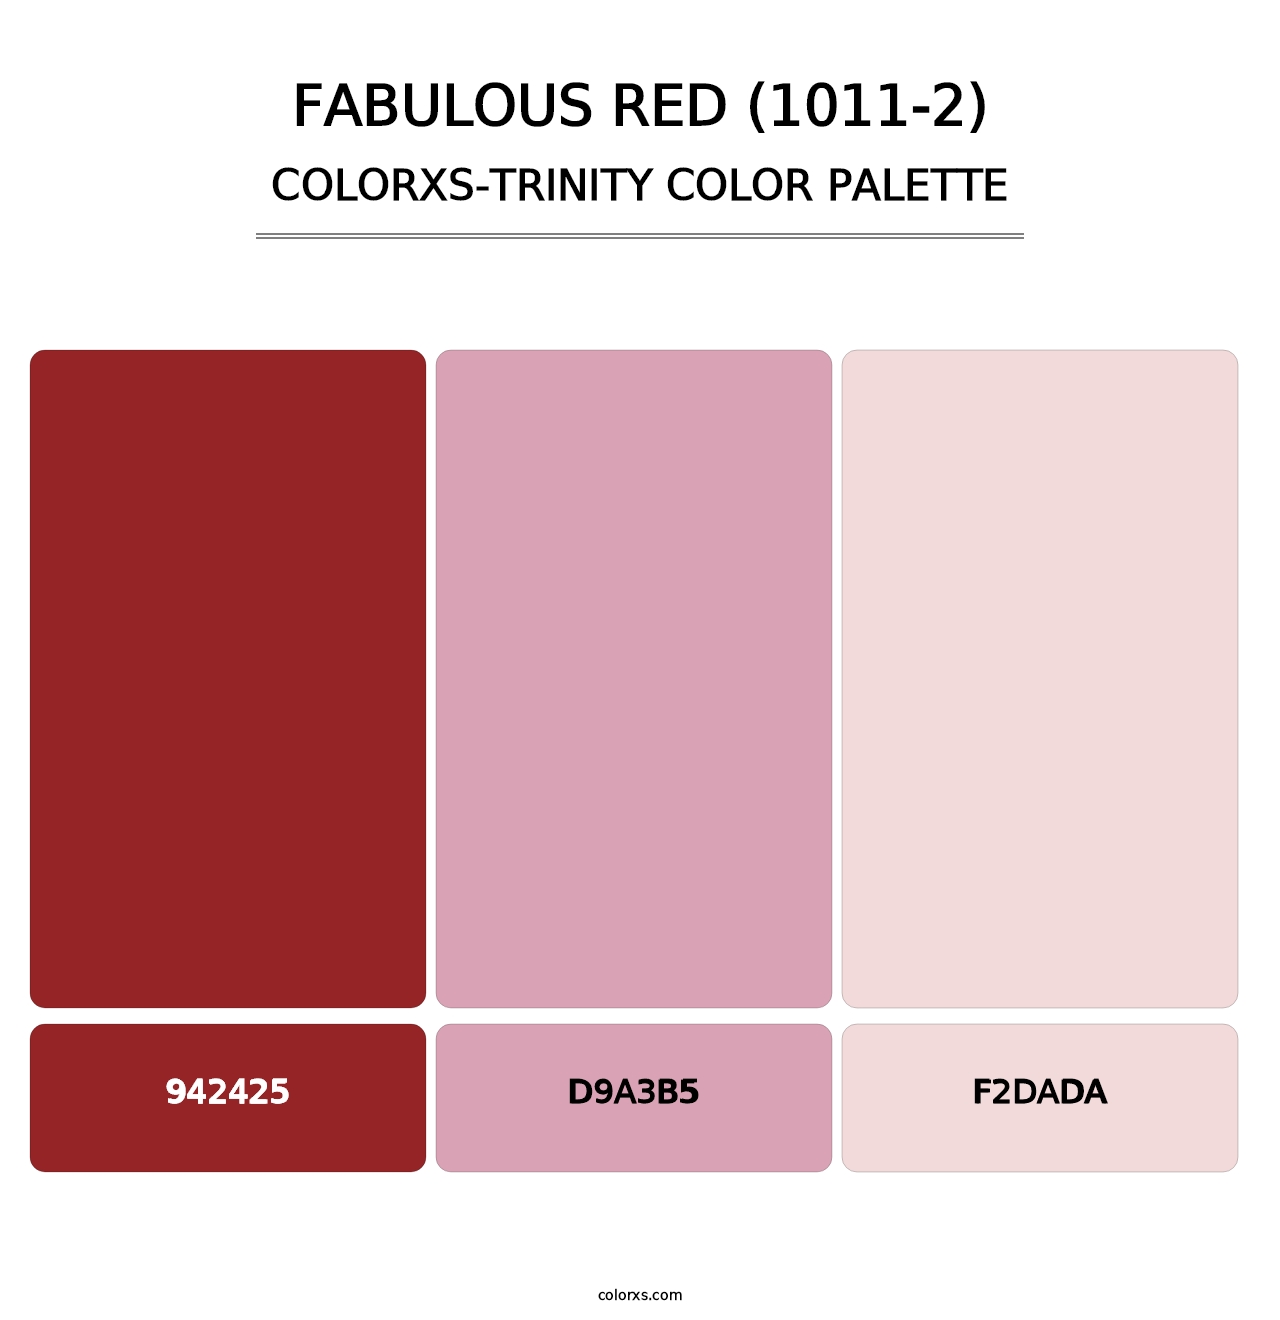 Fabulous Red (1011-2) - Colorxs Trinity Palette